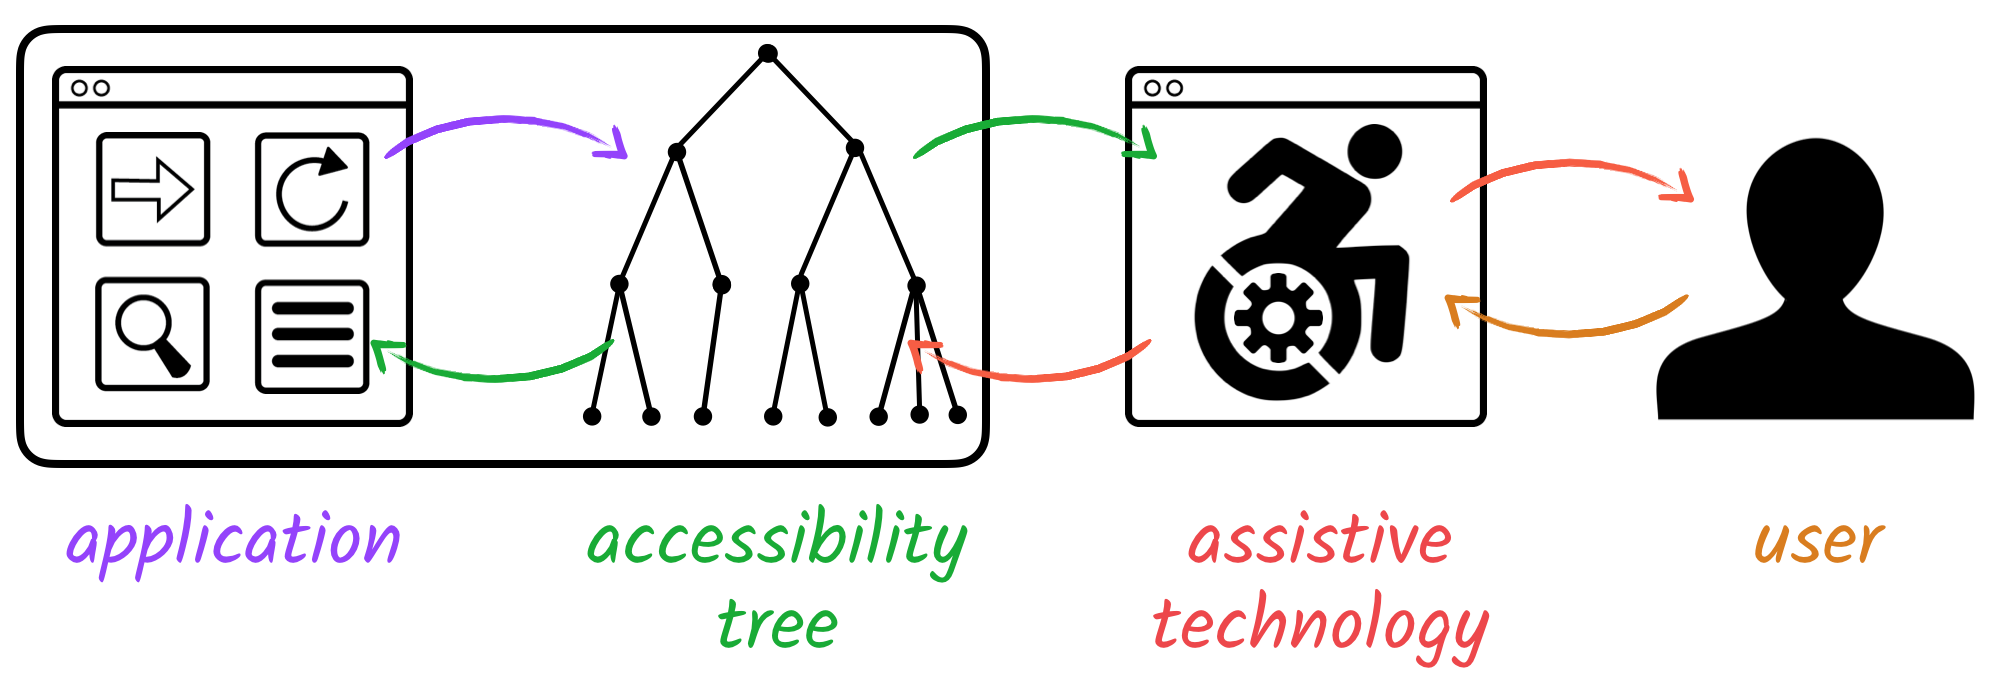 Image showing 4 layers of 2-way communication - from the application, to the accessibility tree, to assistive technology, to the user.